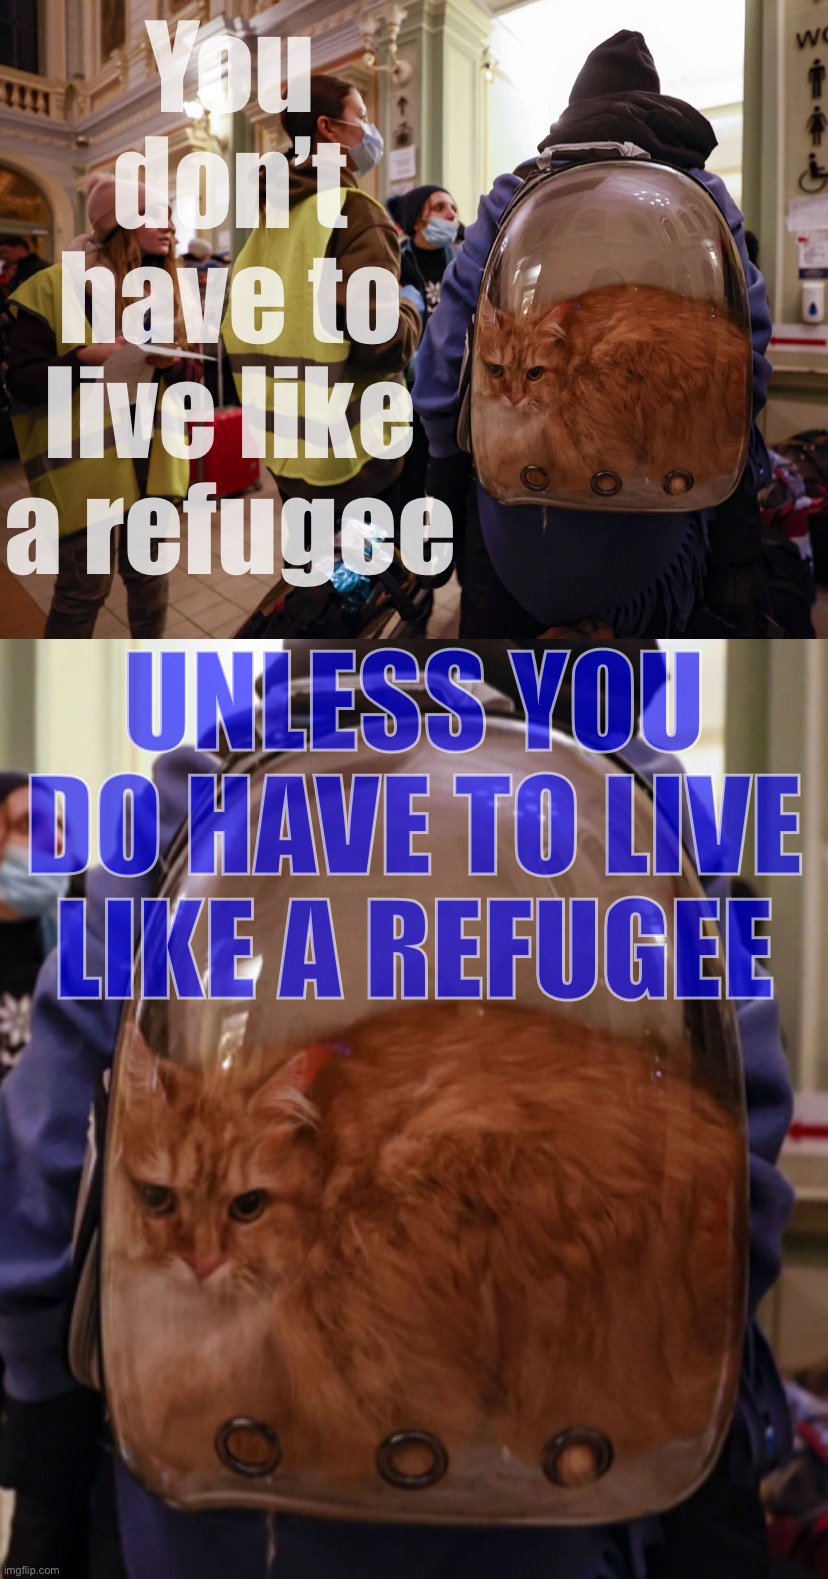 Tom Petty’s song was not written with actual refugees in mind. | You don’t have to live like a refugee; UNLESS YOU DO HAVE TO LIVE LIKE A REFUGEE | image tagged in you do,have to,live like,a,refugee,it really do be like that sometimes | made w/ Imgflip meme maker